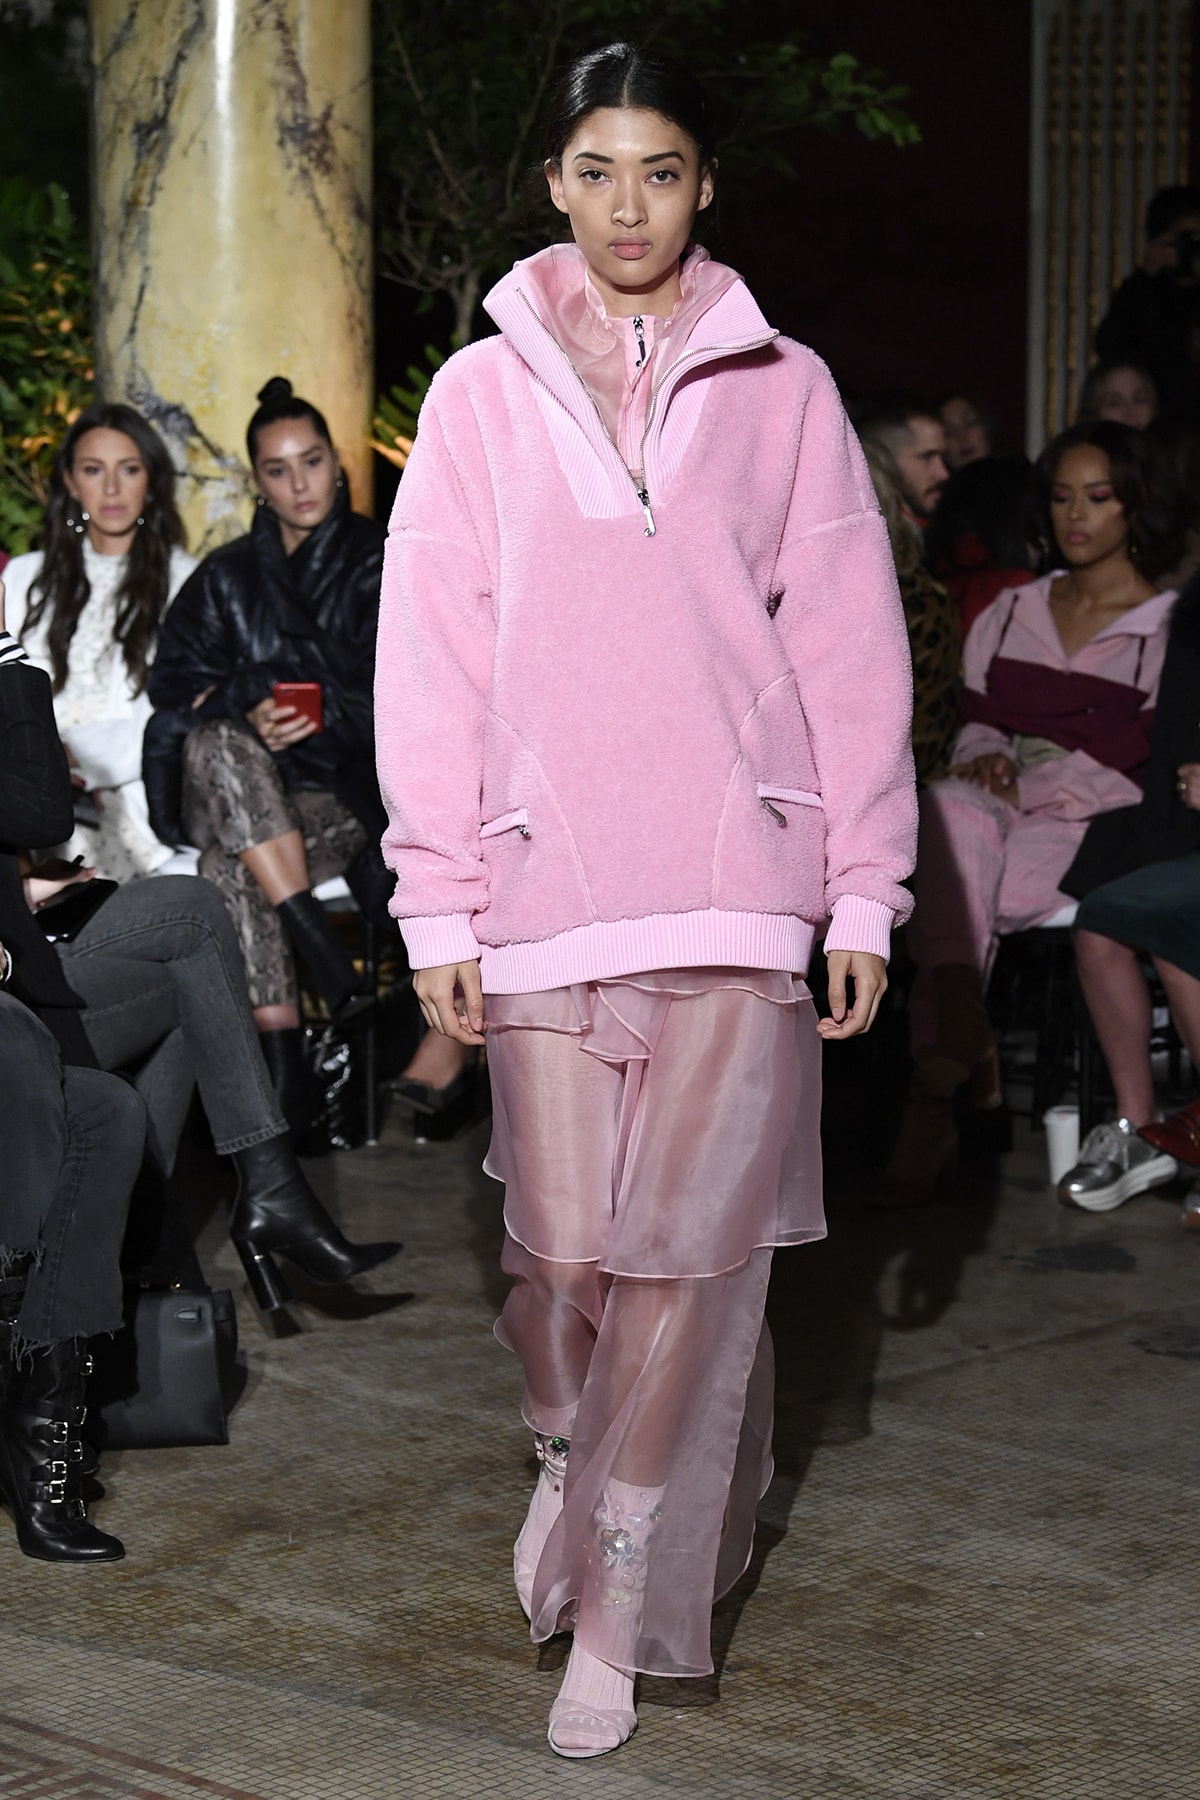 Juicy Couture Fall 2018 Collection